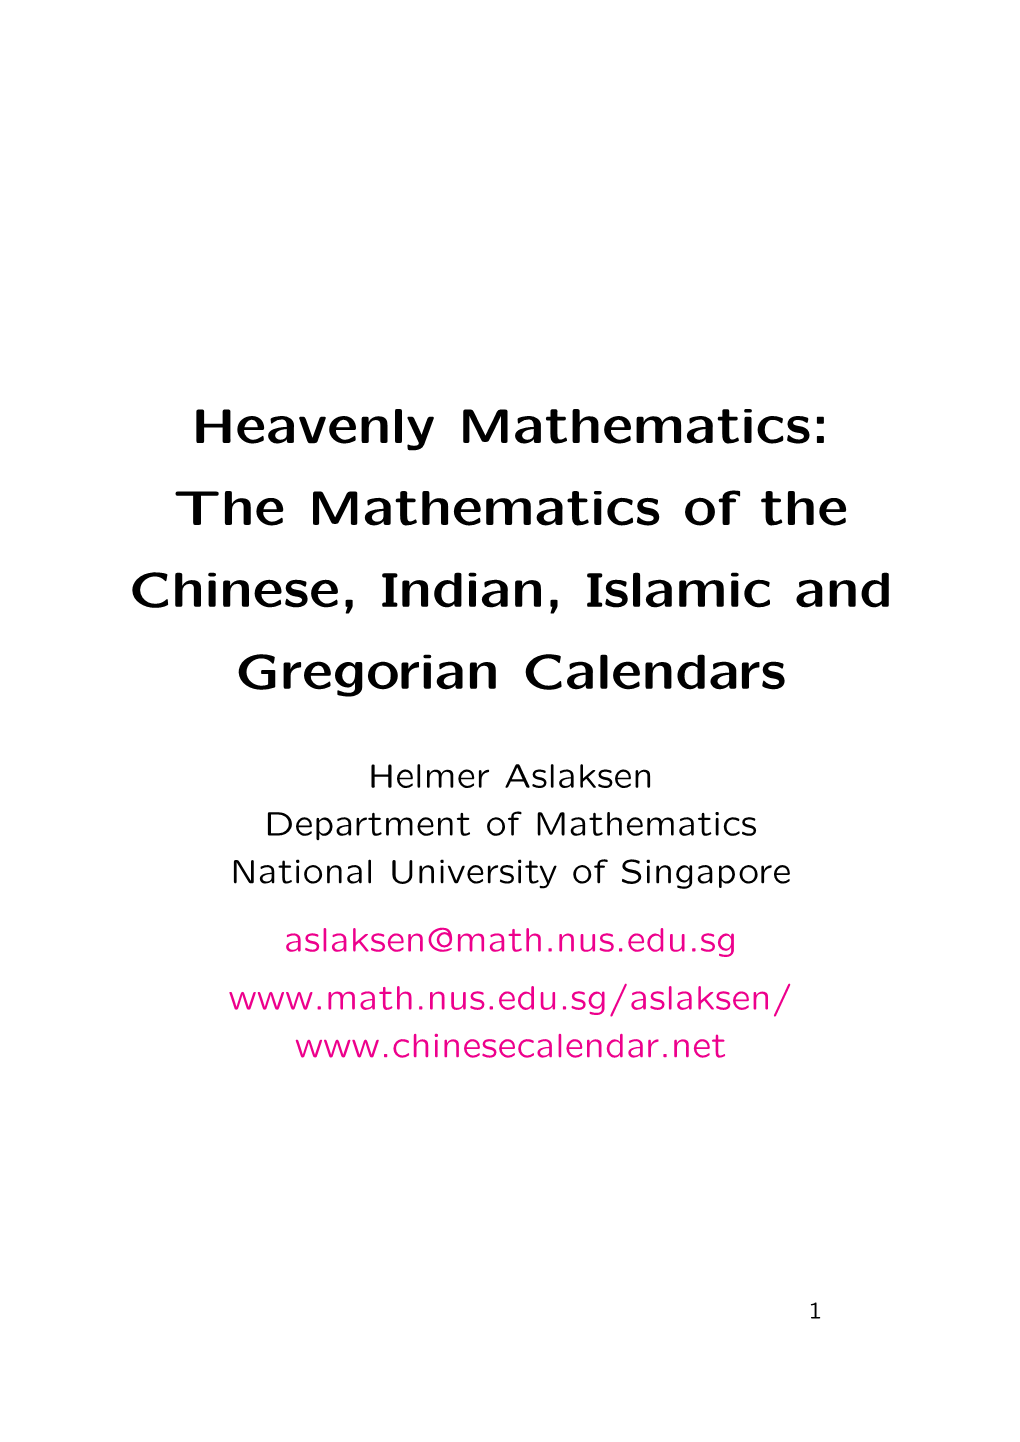 The Mathematics of the Chinese, Indian, Islamic and Gregorian Calendars